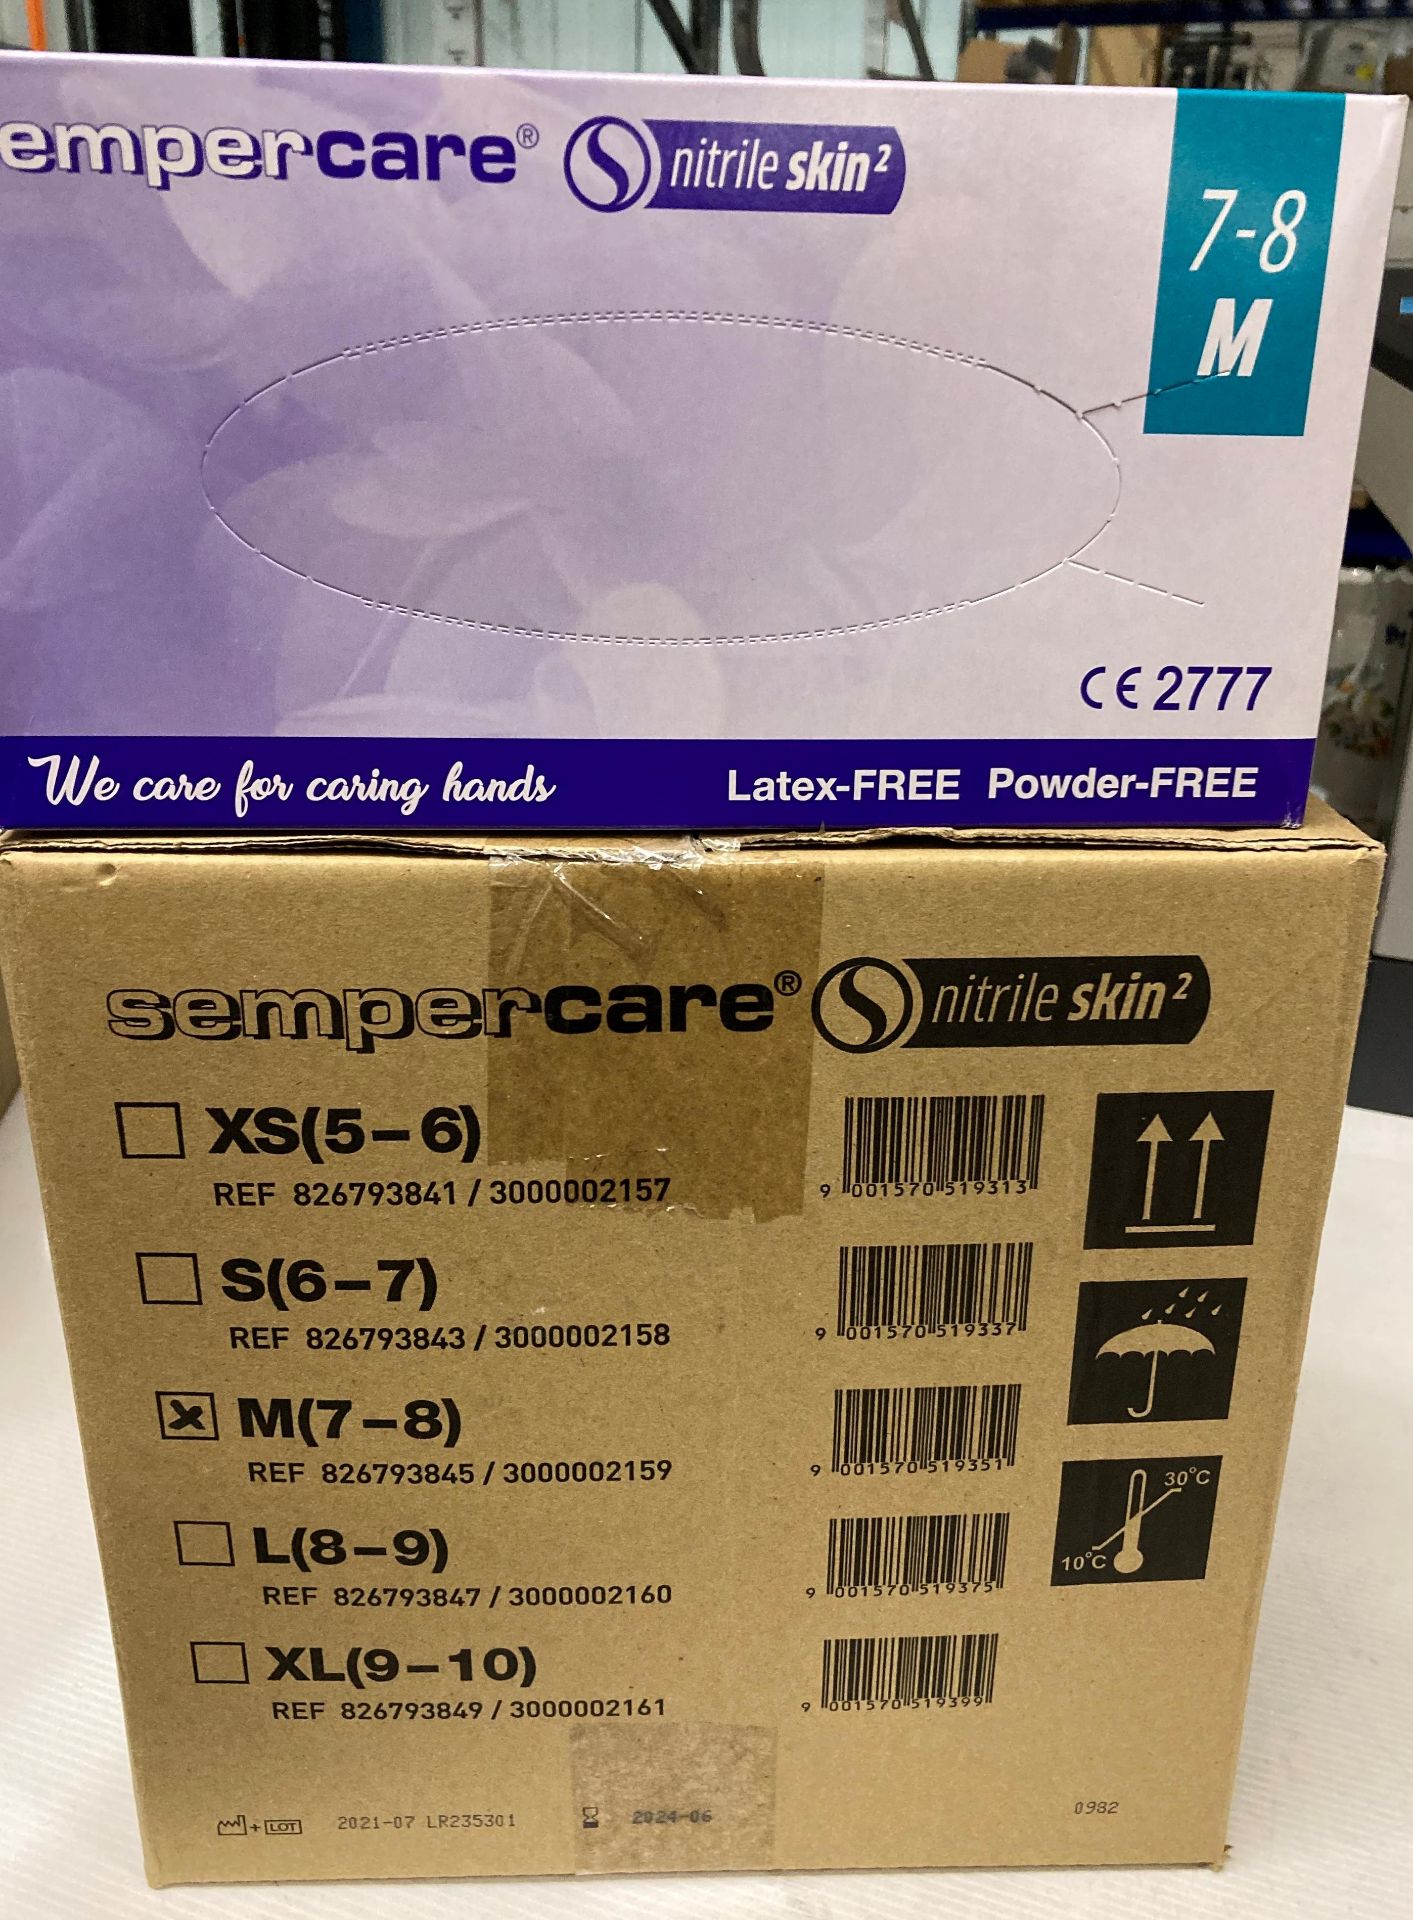 10 x boxes of Sempercare nitrile skin 2 exam gloves size medium (200 gloves per box - 1 x outer